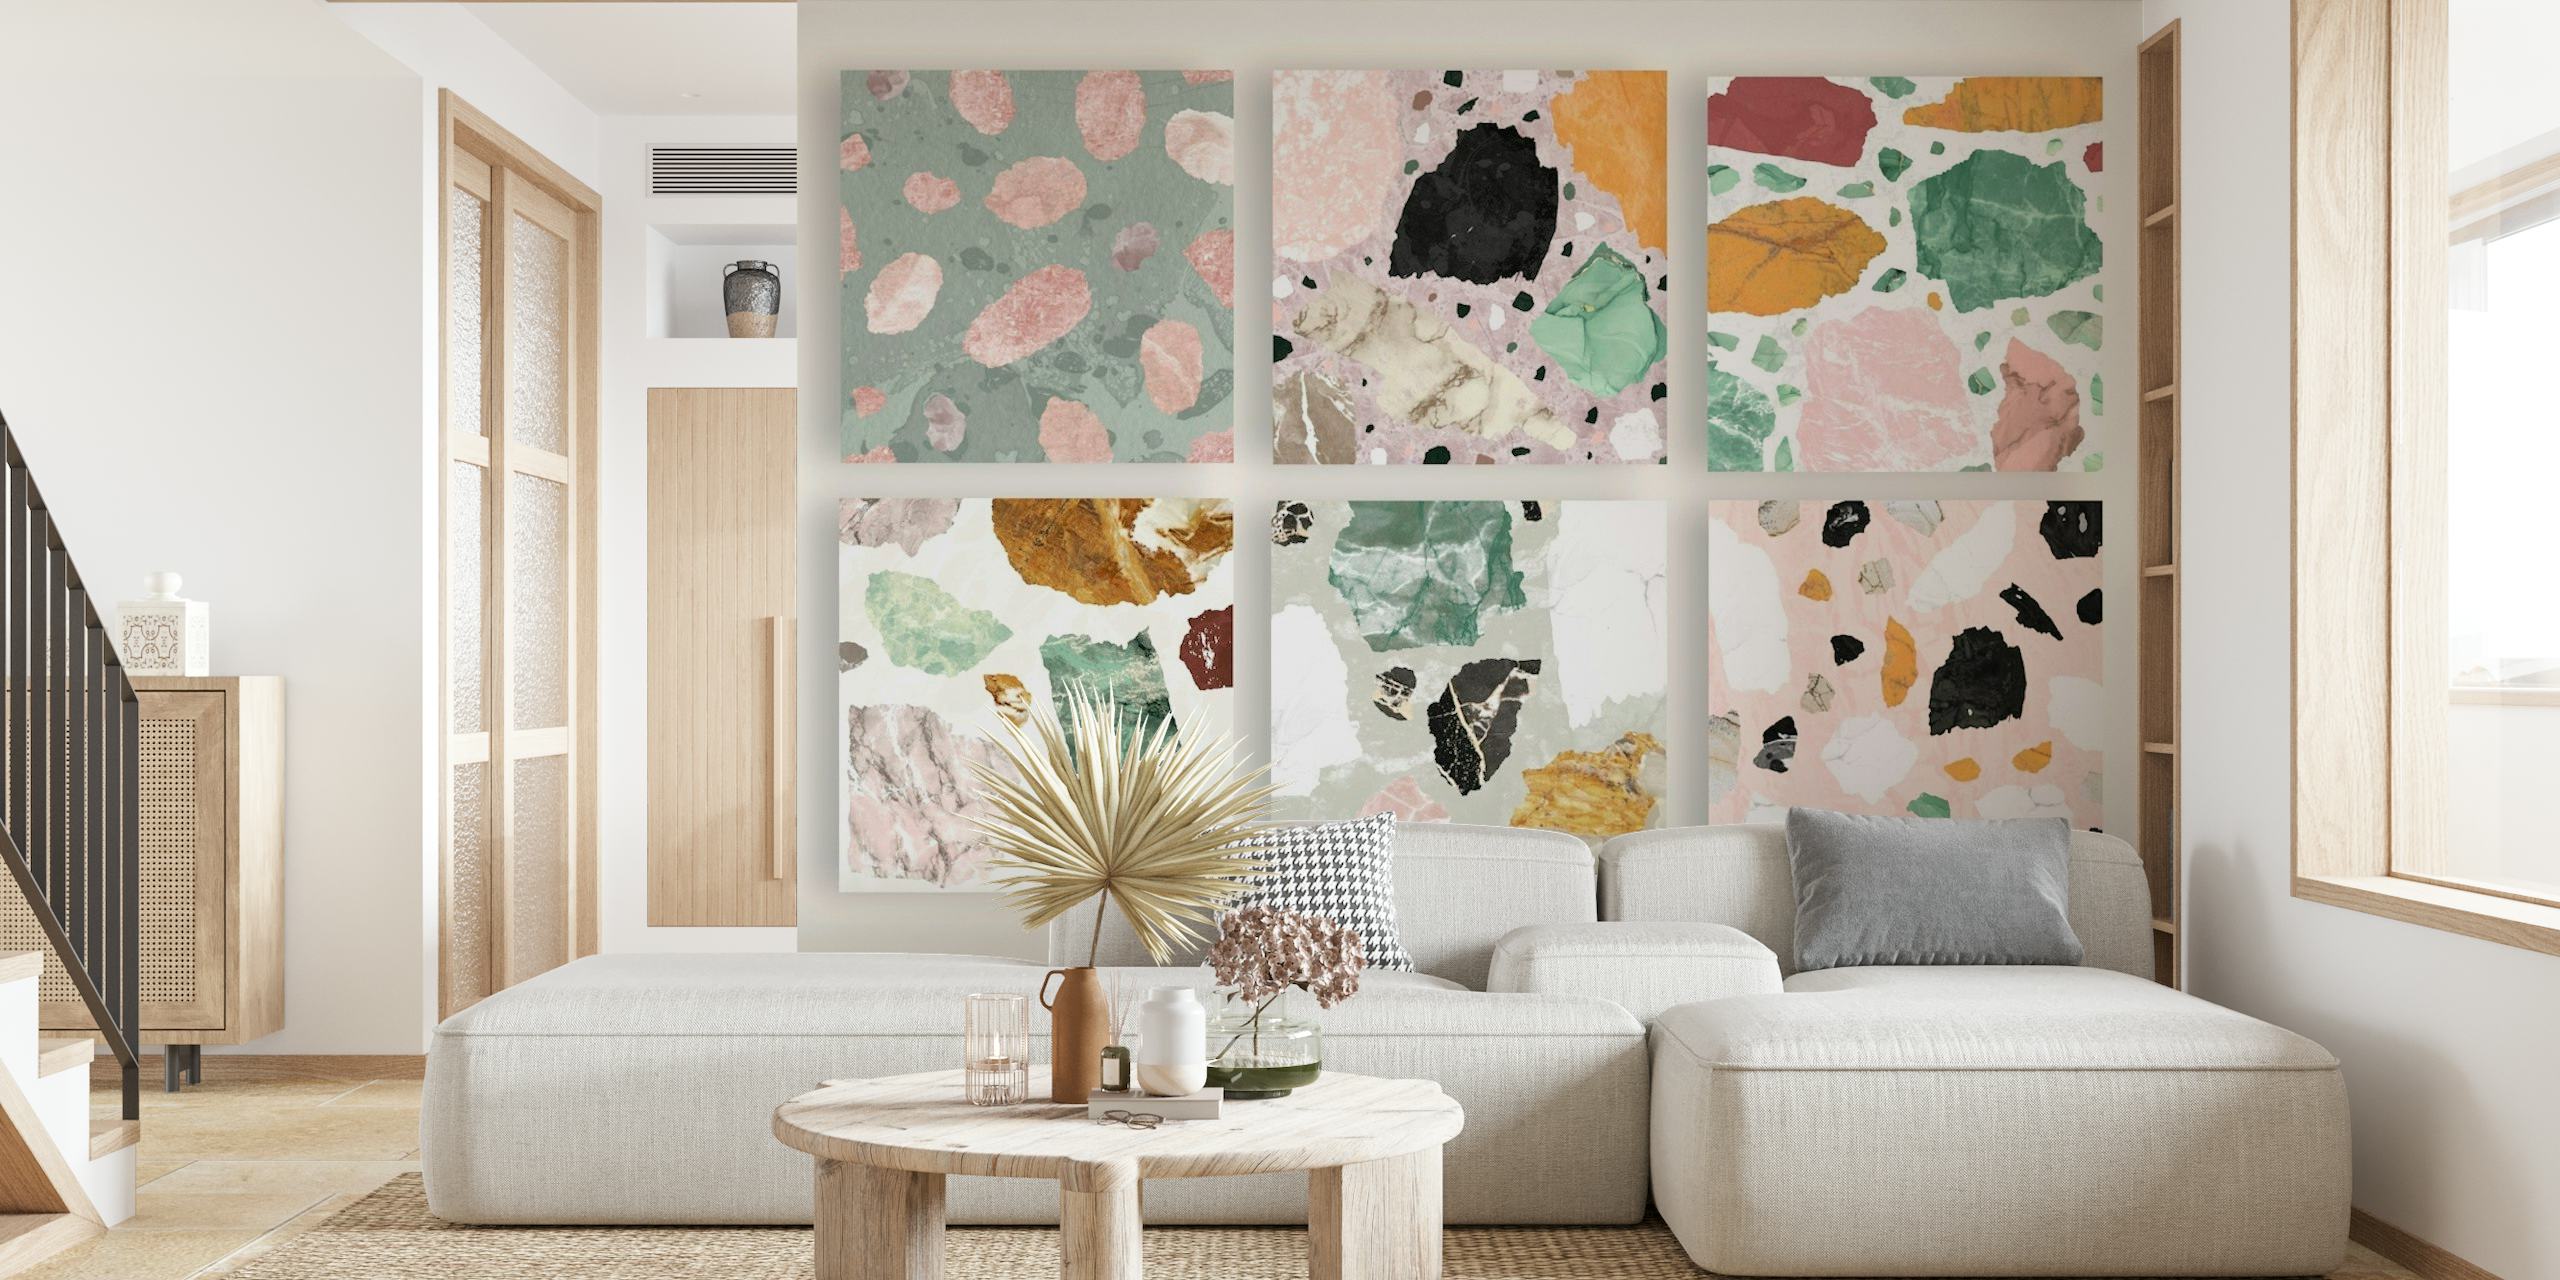 Heartstone pink abstract collage wall mural with pink, green, and black hues.